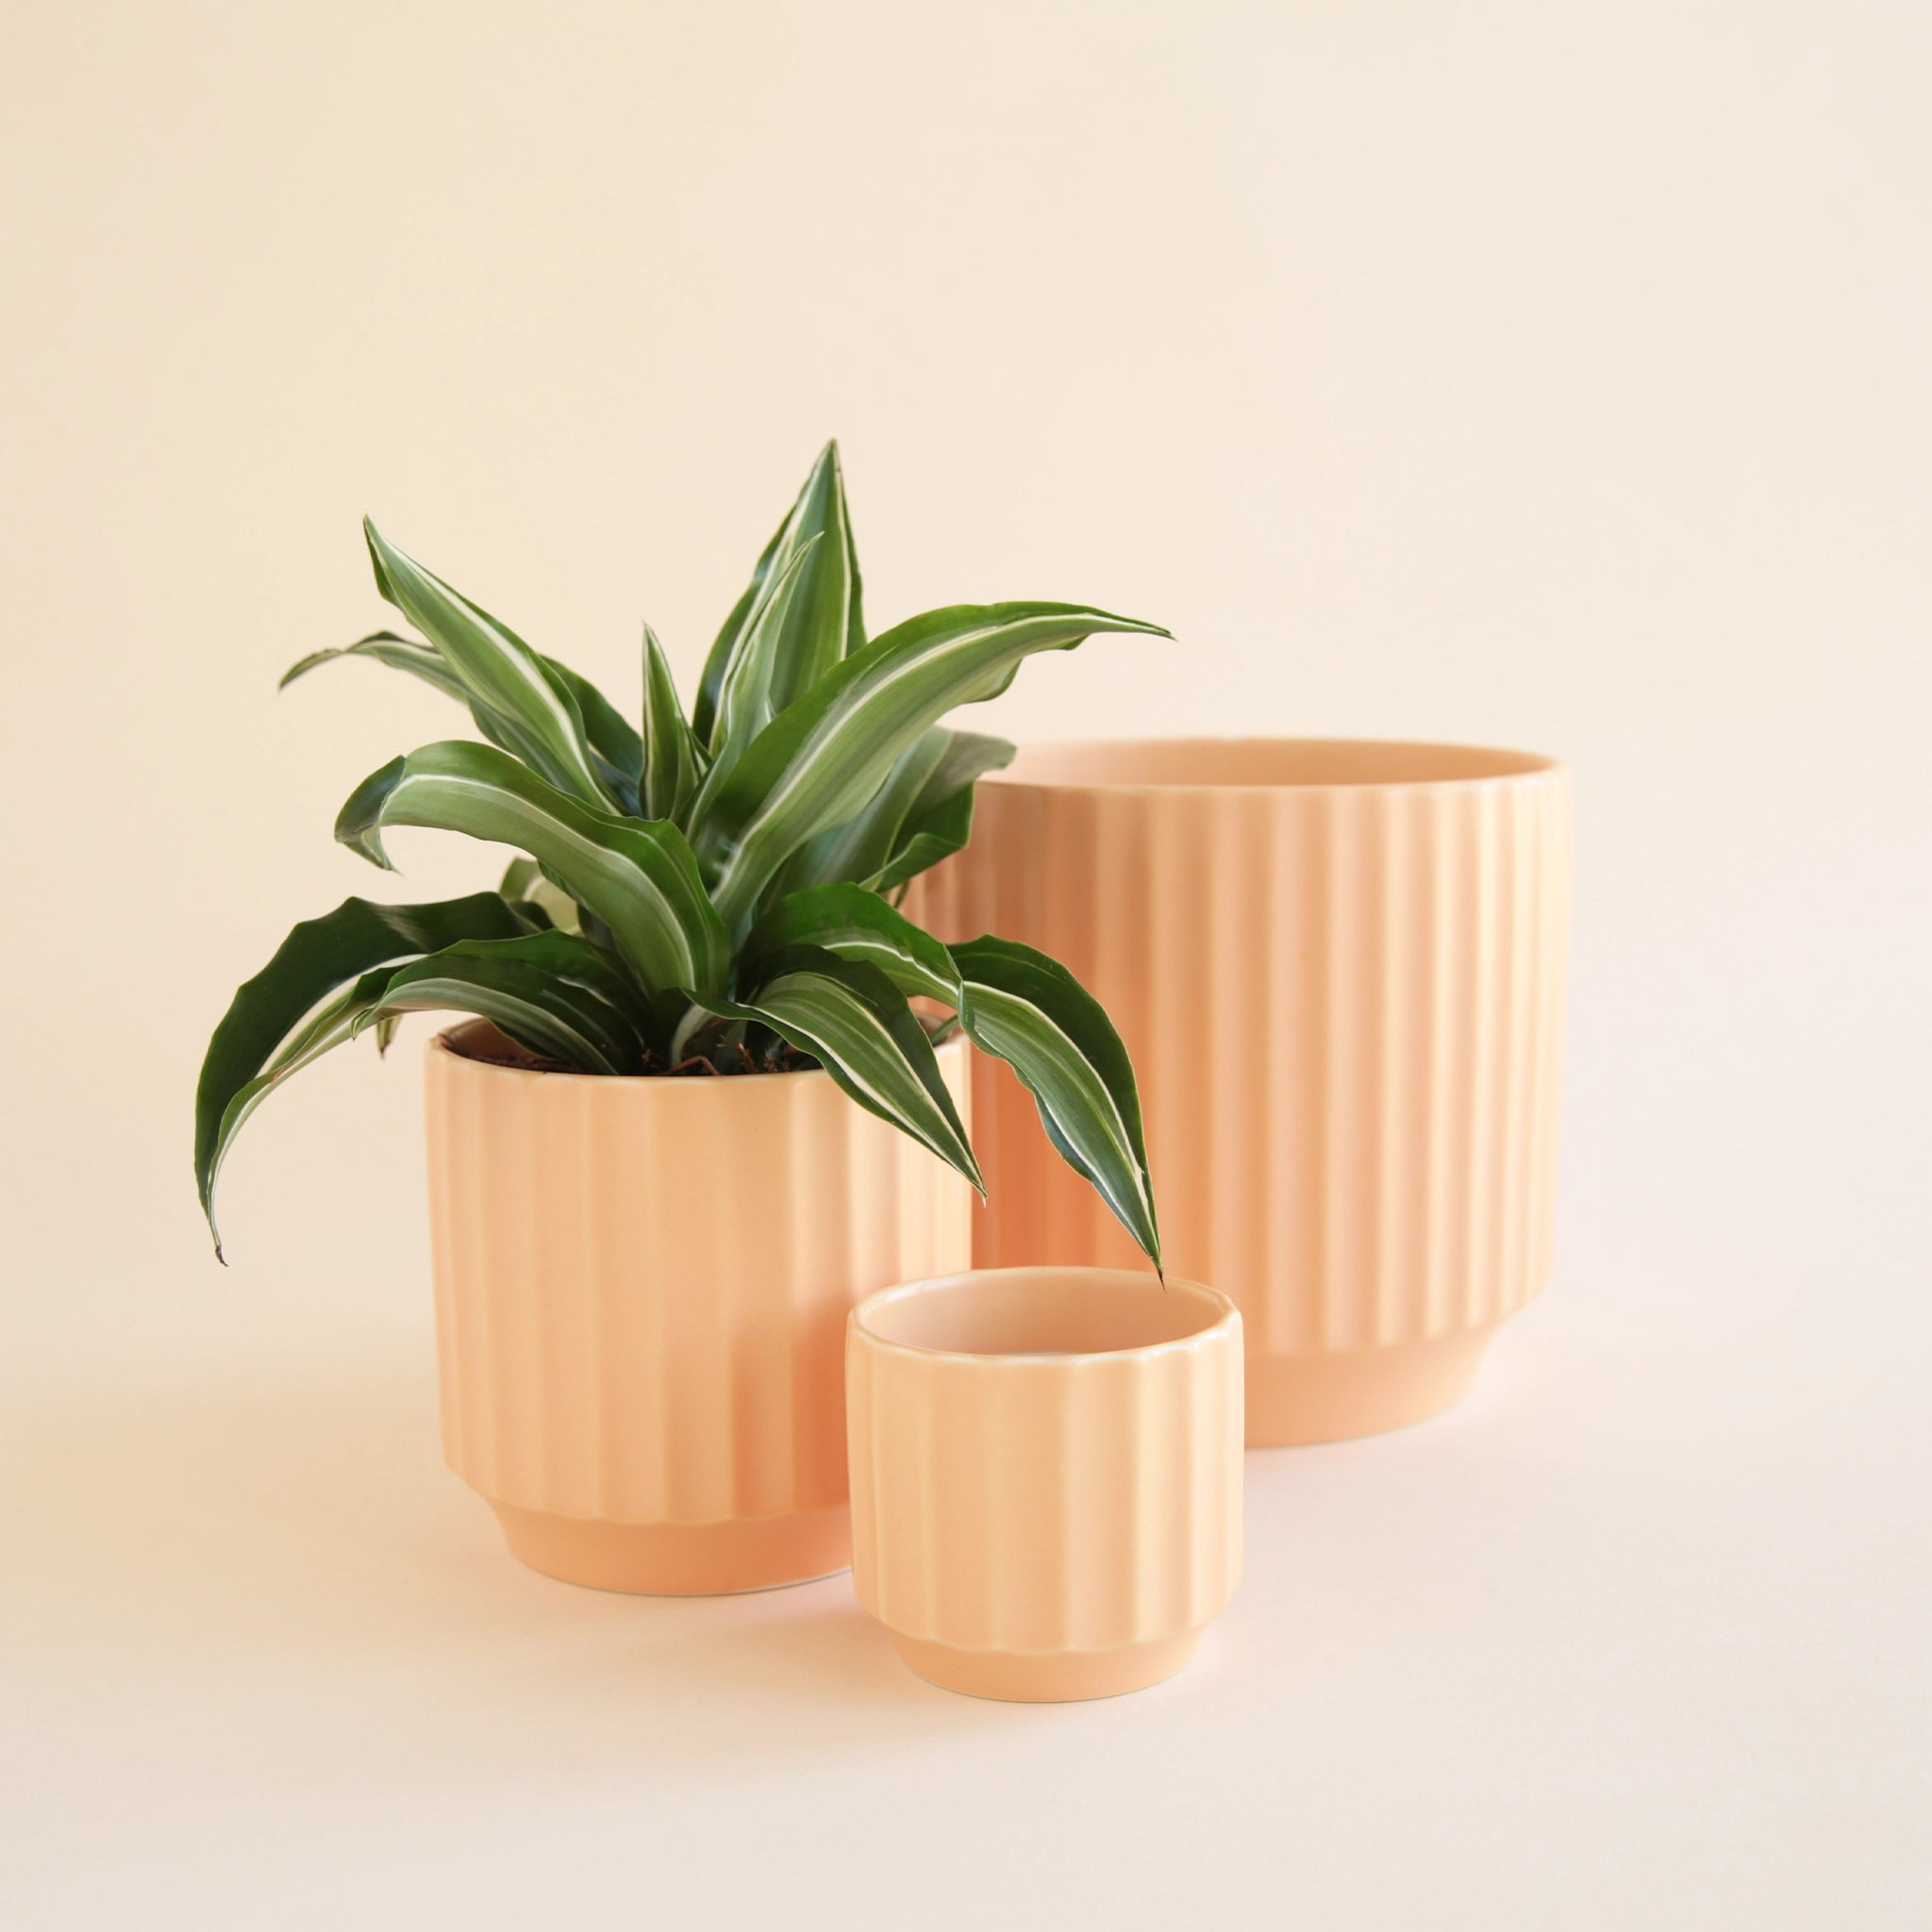 On an ivory background is three different shaped ceramic pots in a warm toned pink shade. 